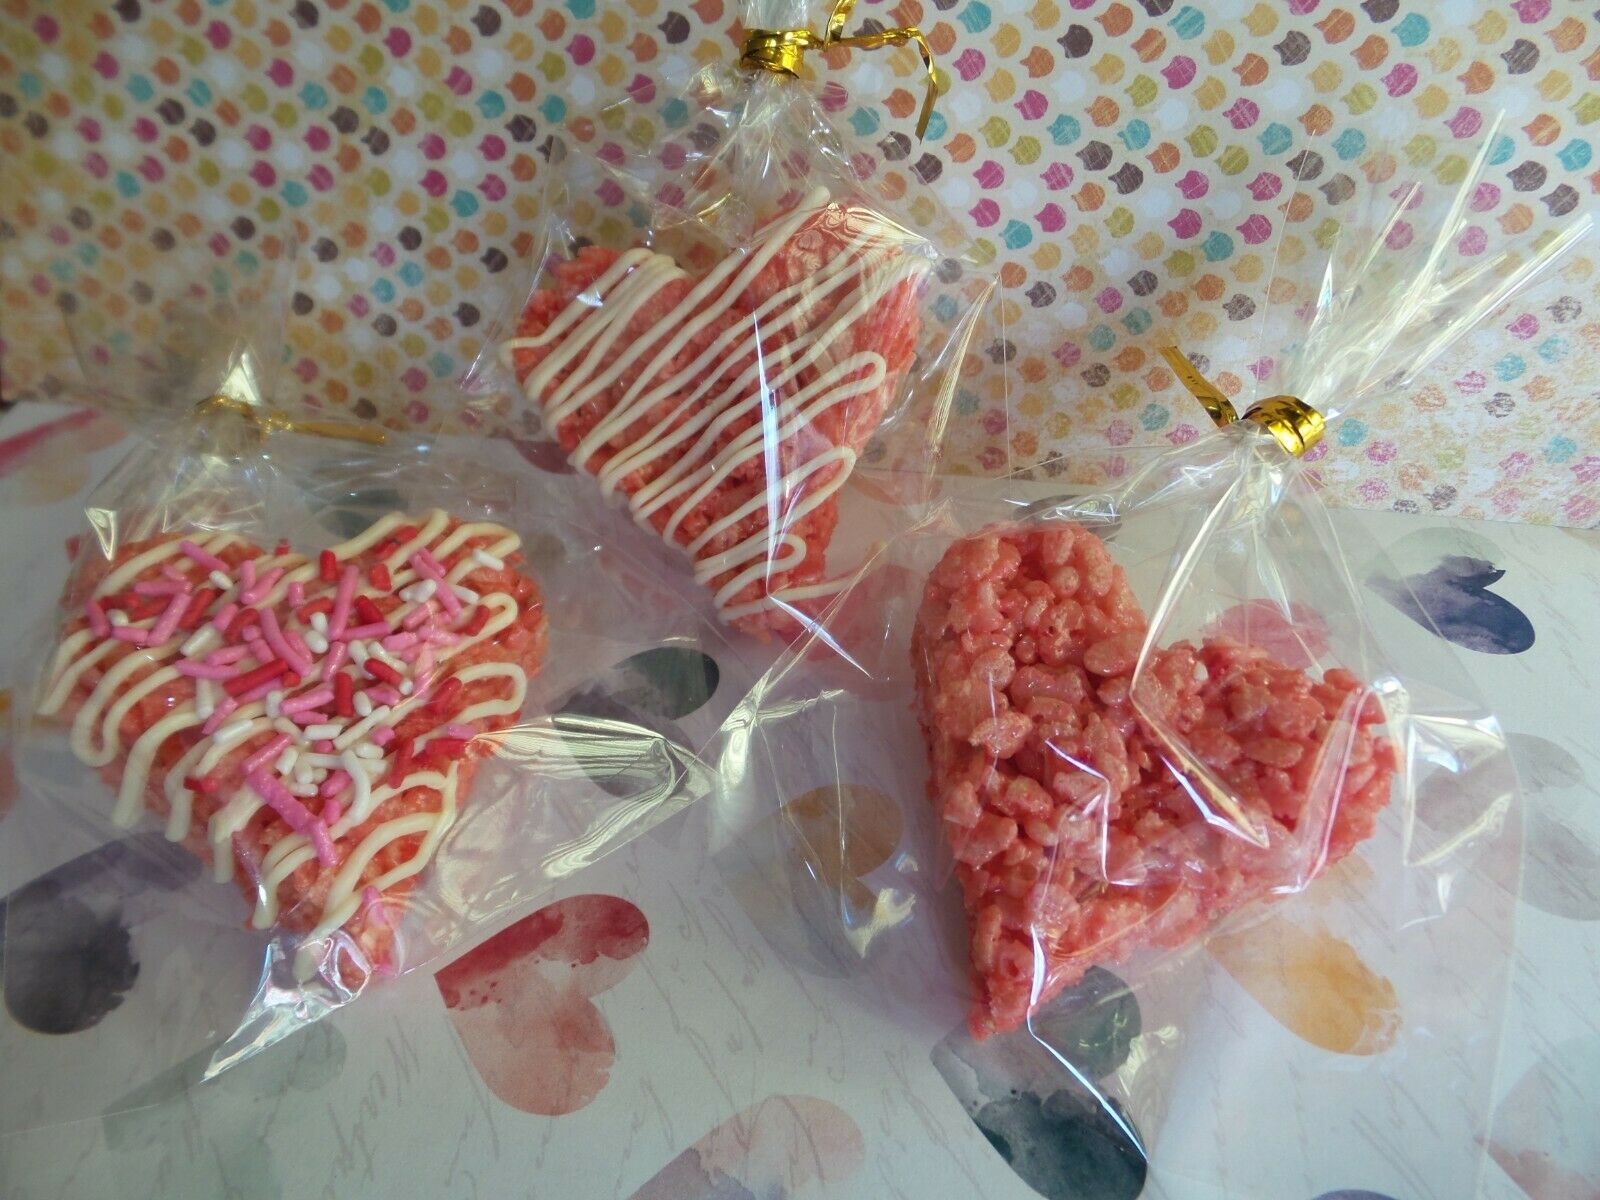 20 Forever Sweetheart Heart Shaped Rice Krispies Treats*valentine/wedding/party